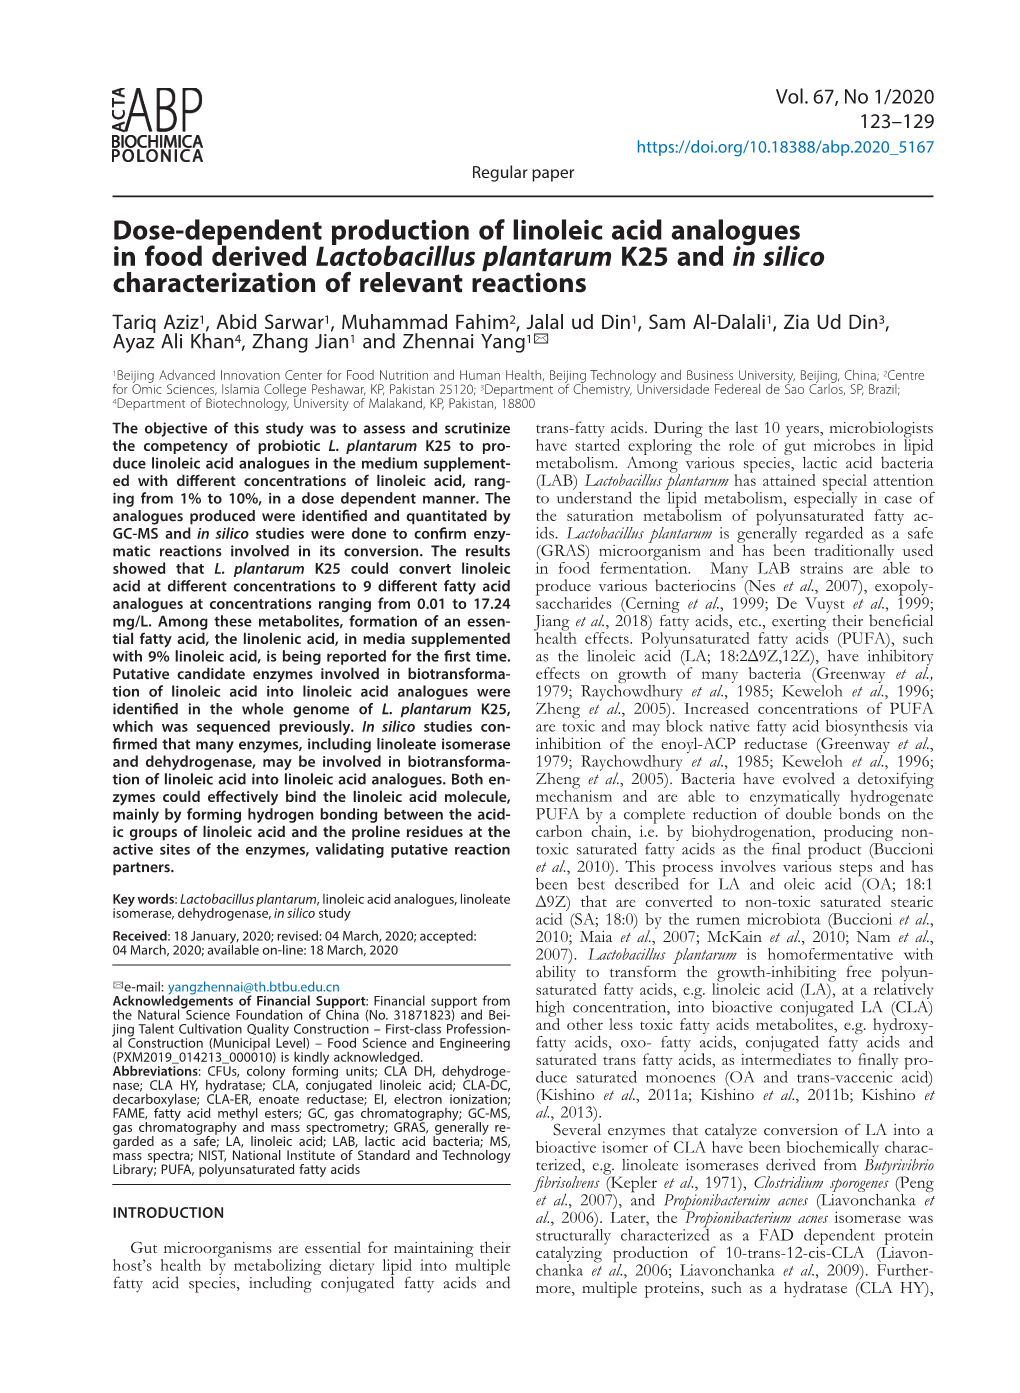 Dose-Dependent Production of Linoleic Acid Analogues in Food Derived